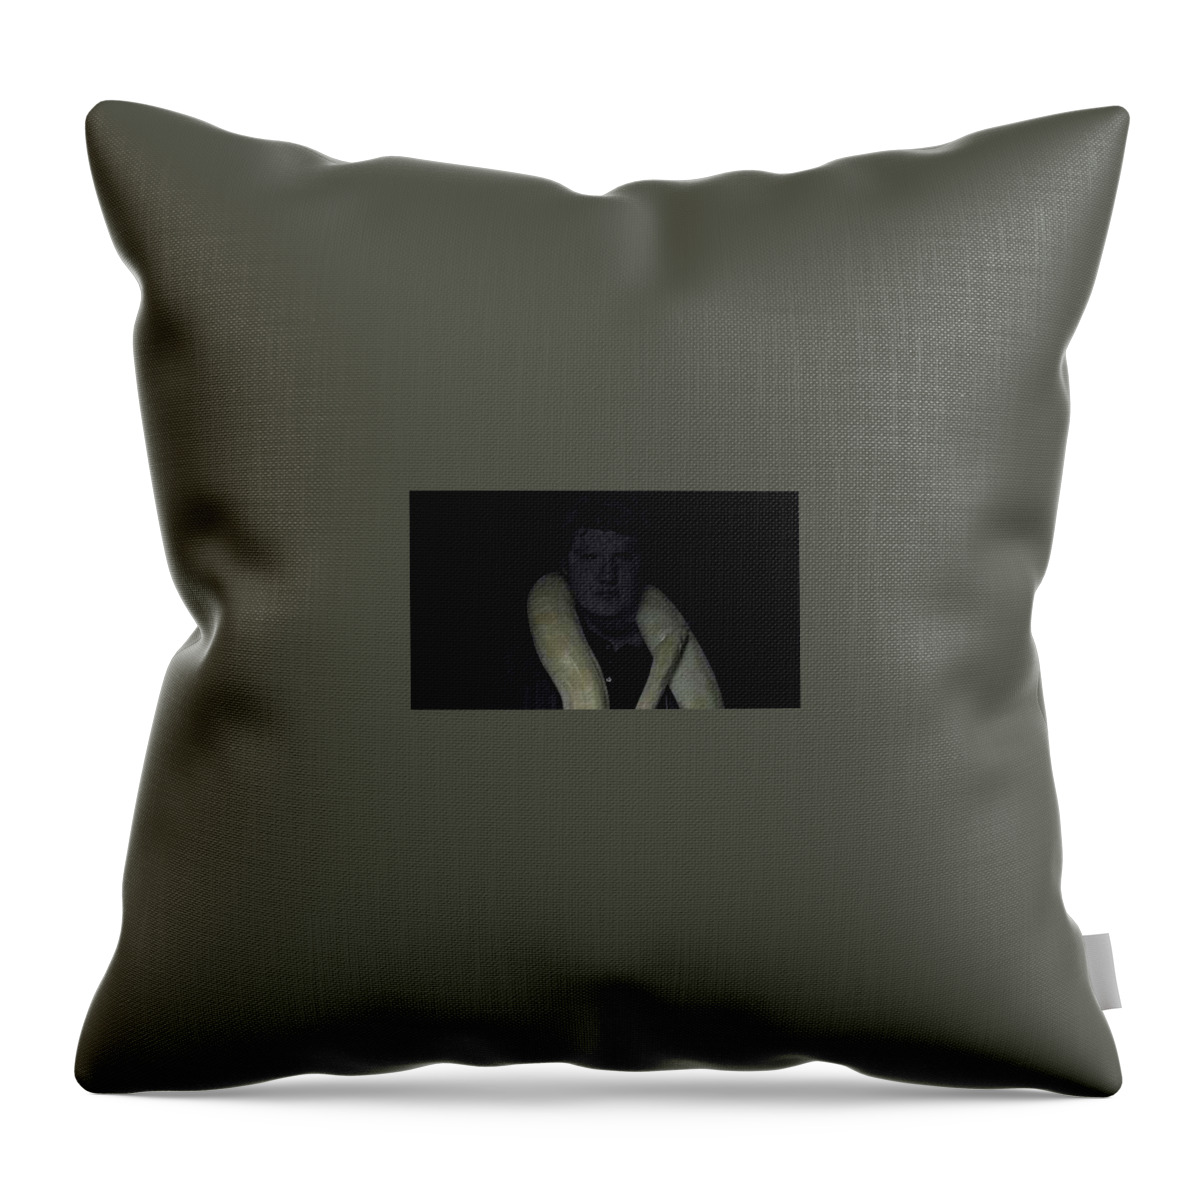 Black Throw Pillow featuring the photograph The Serpent by Michael Baker